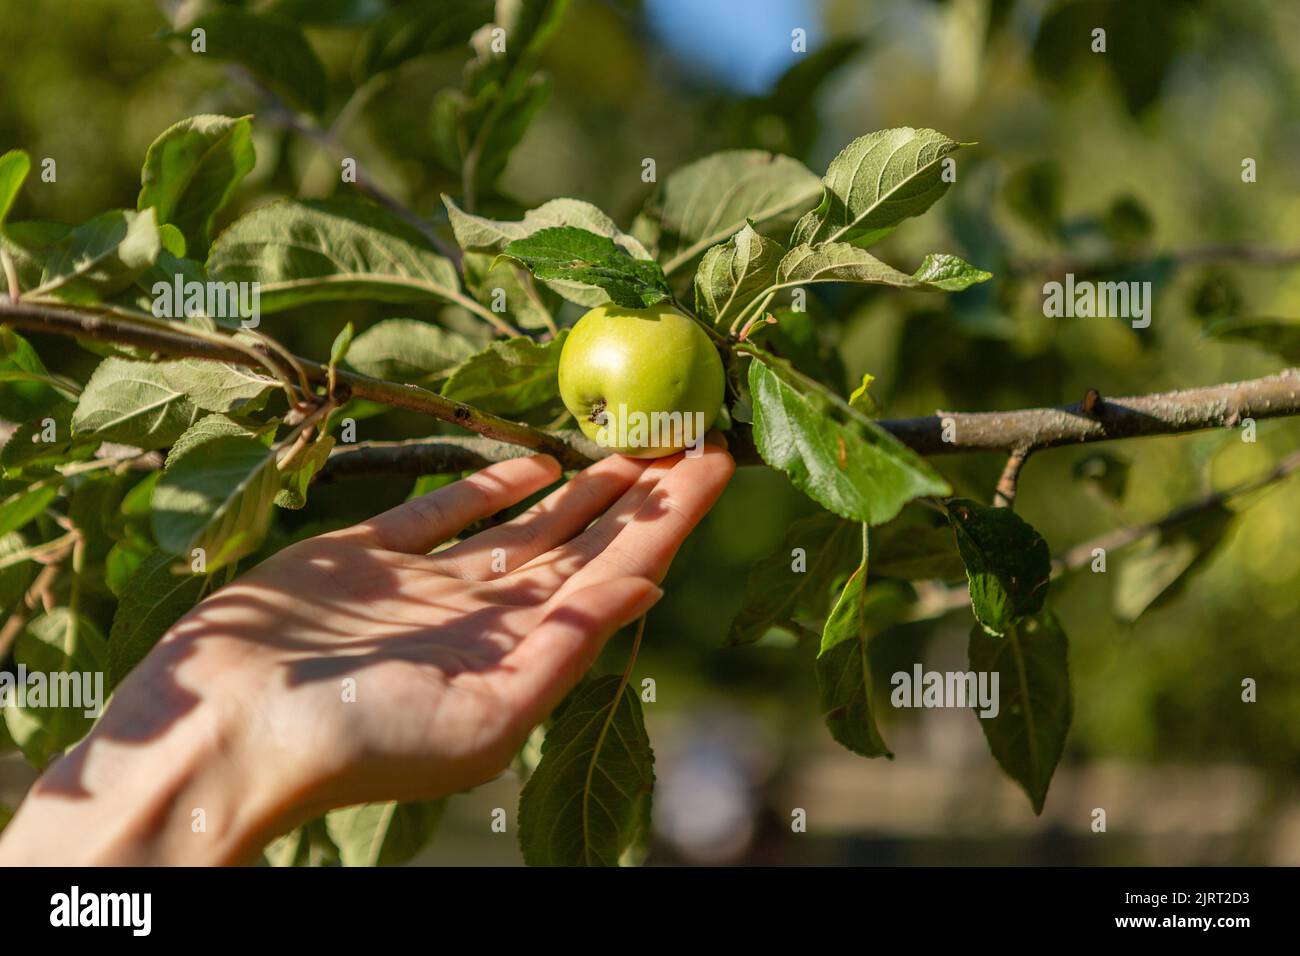 Woman is reaching out for an apple Stock Photo